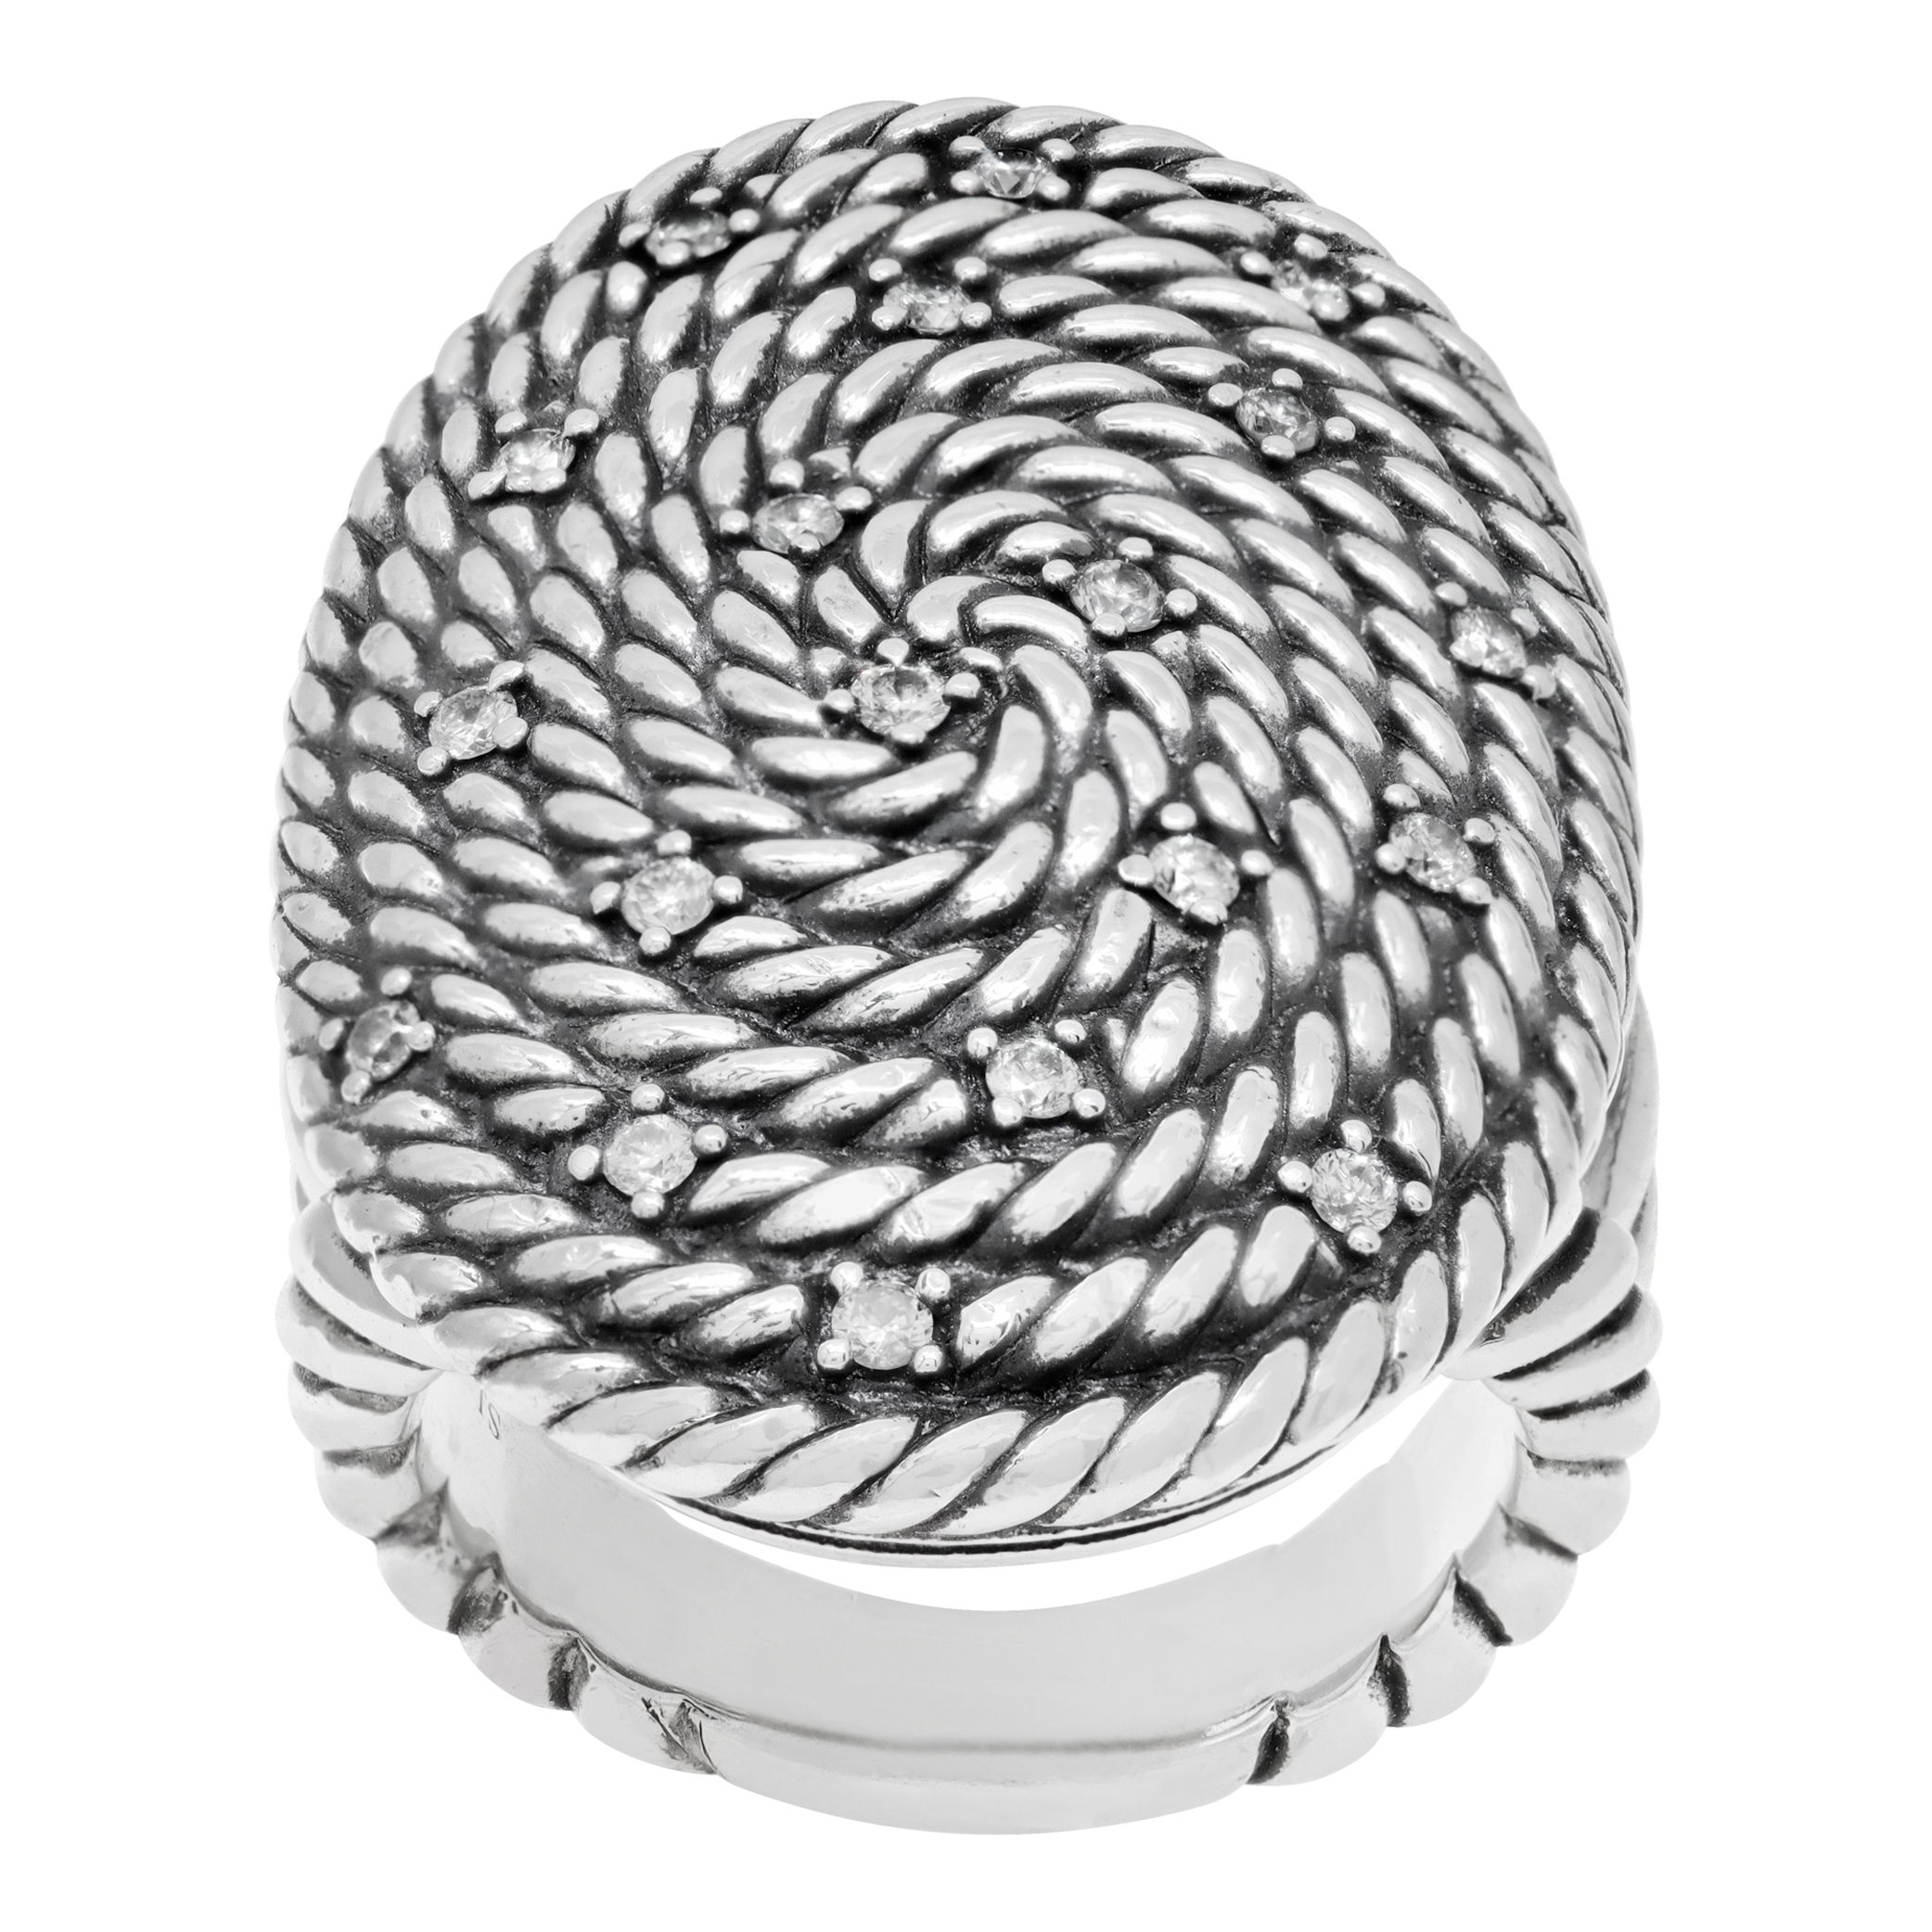 David Yurman sterling silver coil ring with diamonds